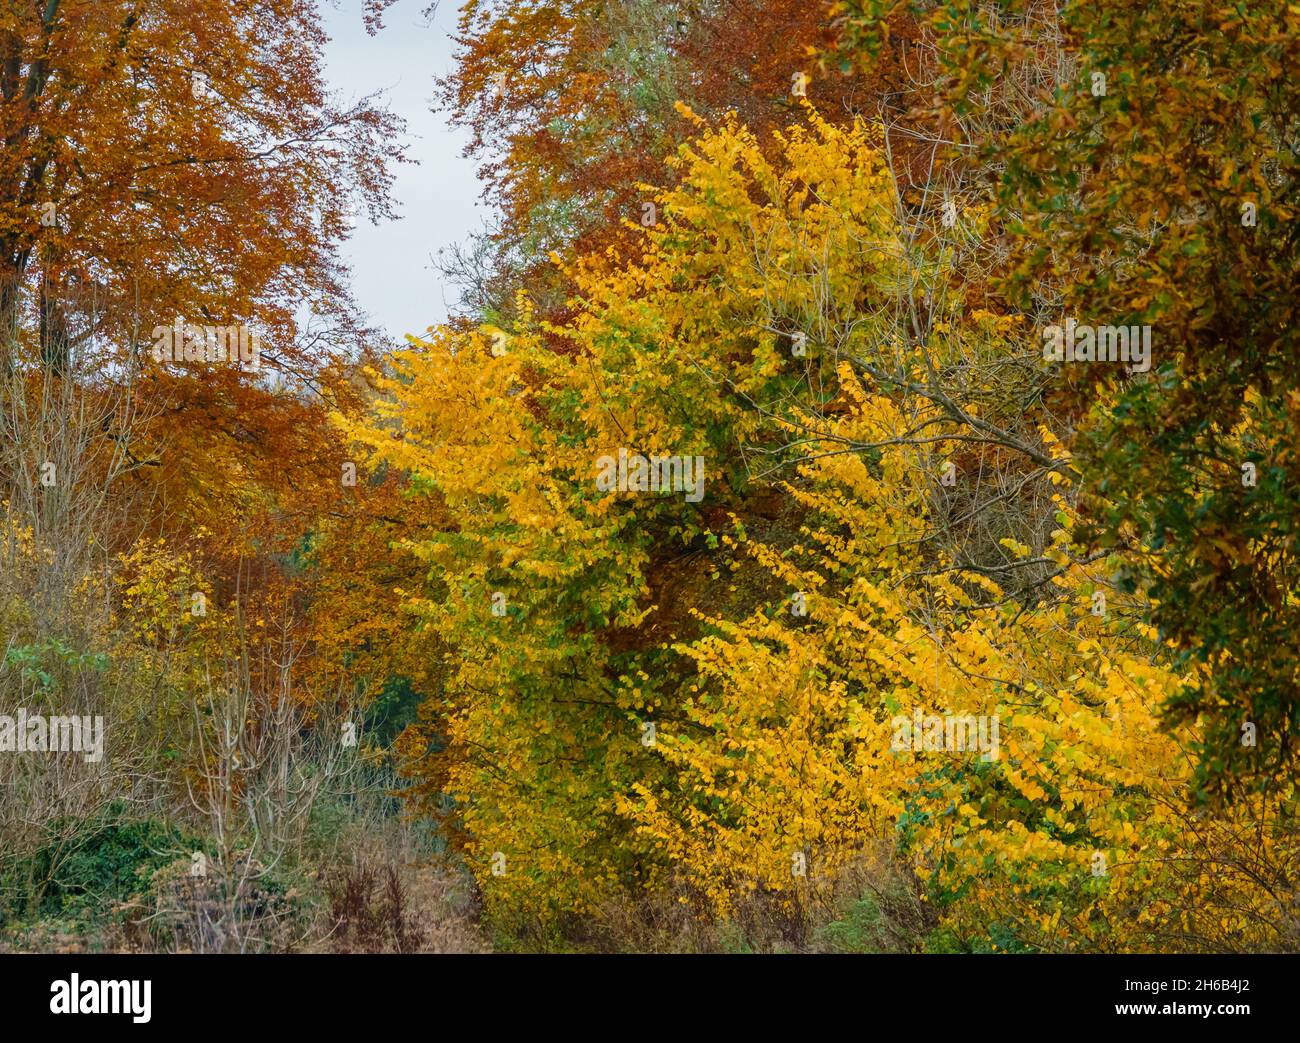 an autumnal track glowing with gold, yellow and copper leaves Stock Photo